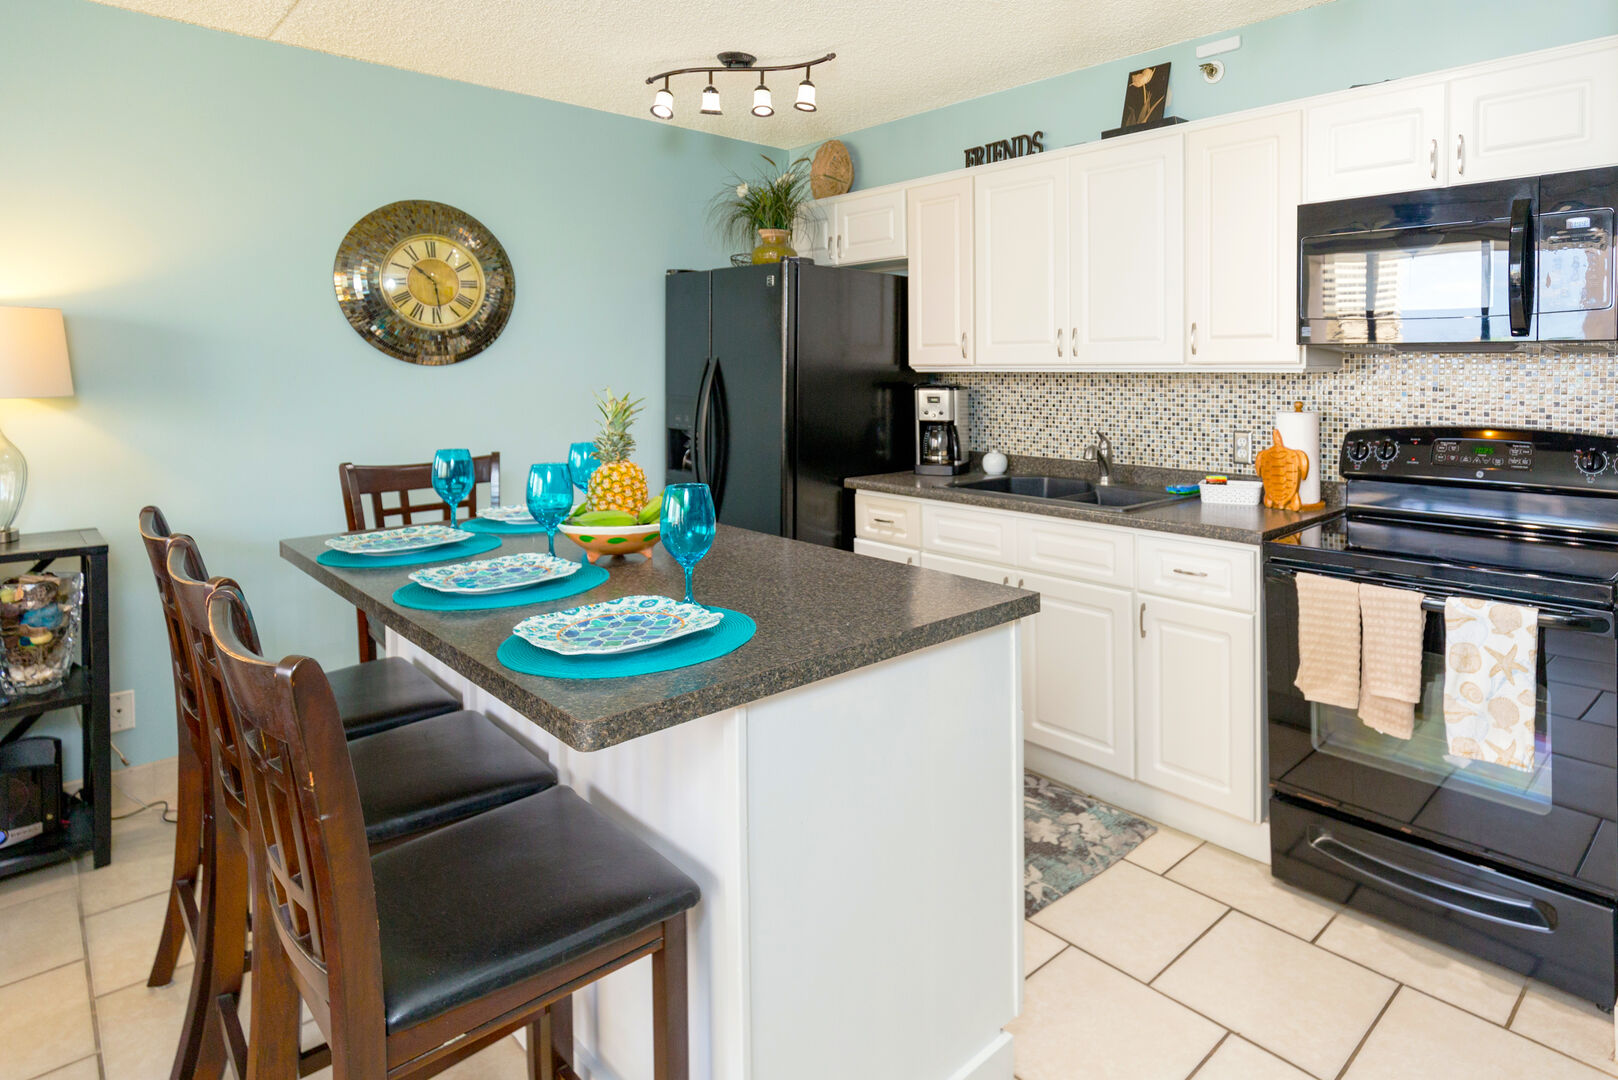 Fully equipped kitchen with full-size refrigerator, microwave, stove